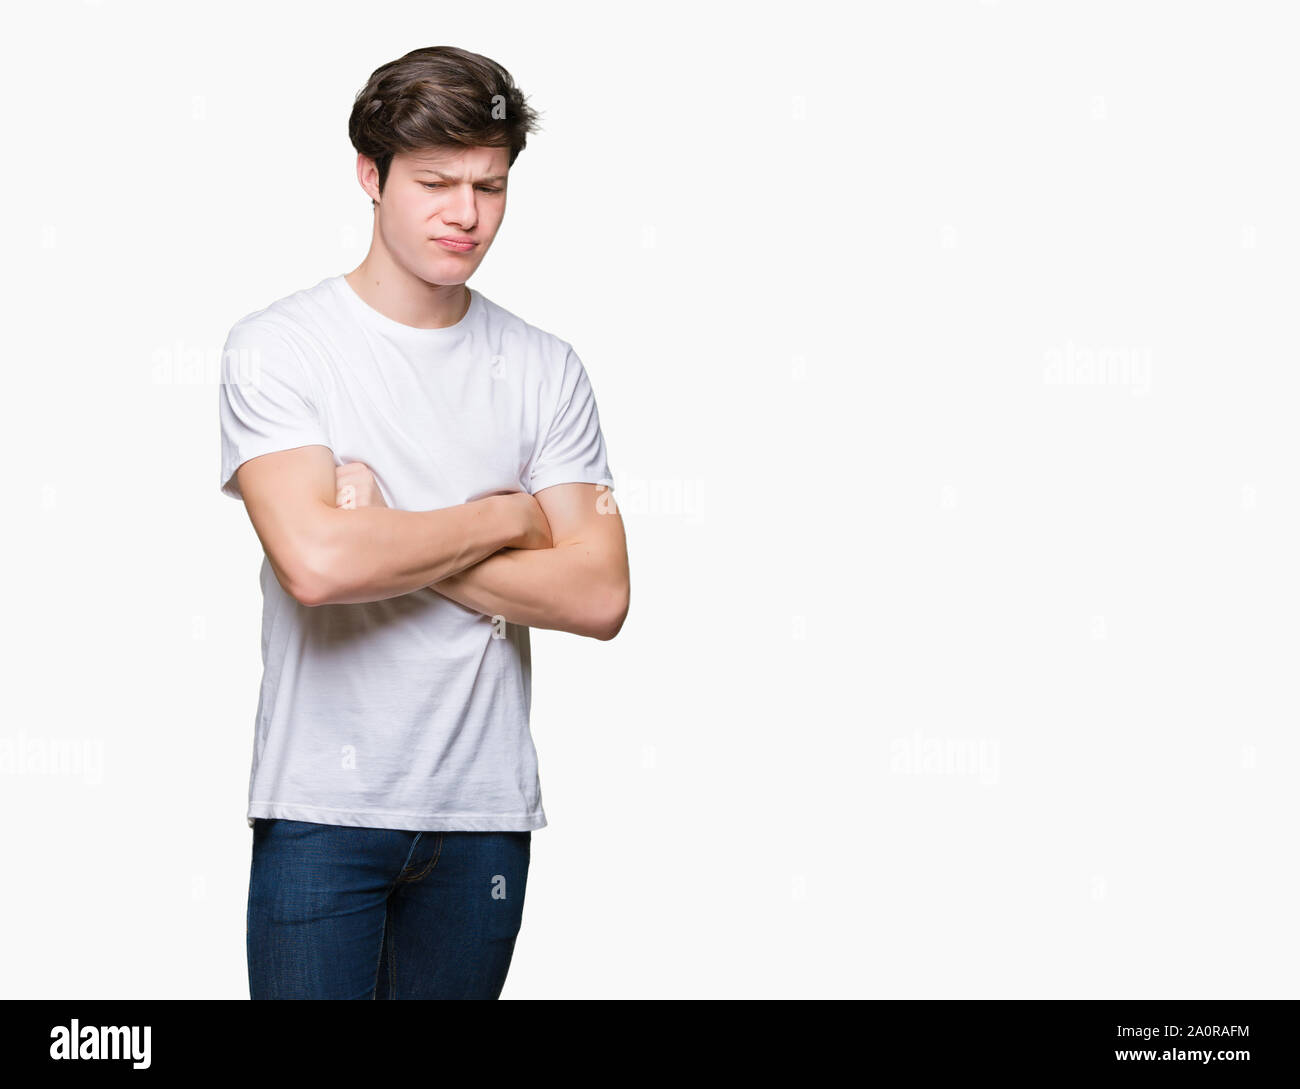 Young handsome man wearing casual white t-shirt over isolated background skeptic and nervous, disapproving expression on face with crossed arms. Negat Stock Photo